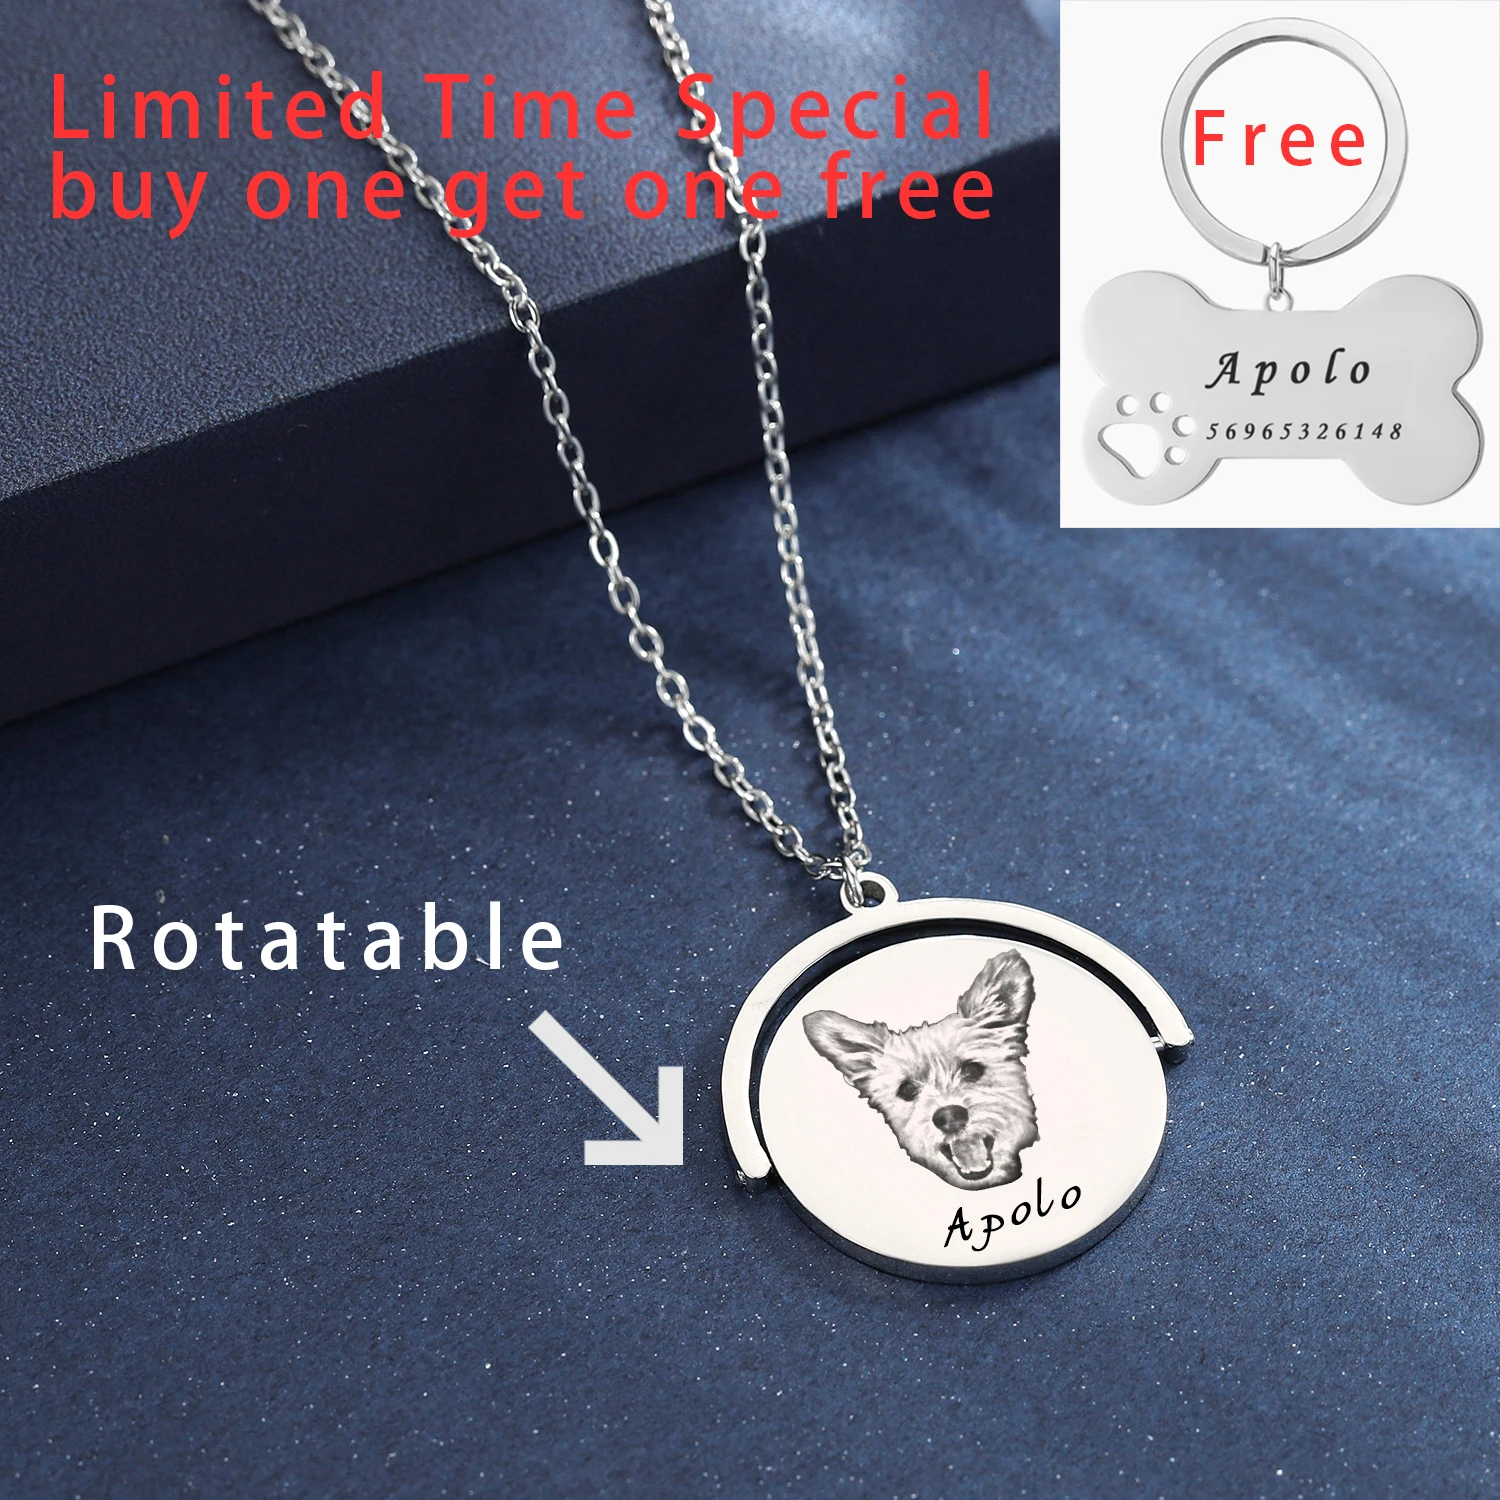 Personalized Pet Photo Engraved Necklace Stainless Steel Engraved Rotatable Pendants Relieve Stress Necklace for 